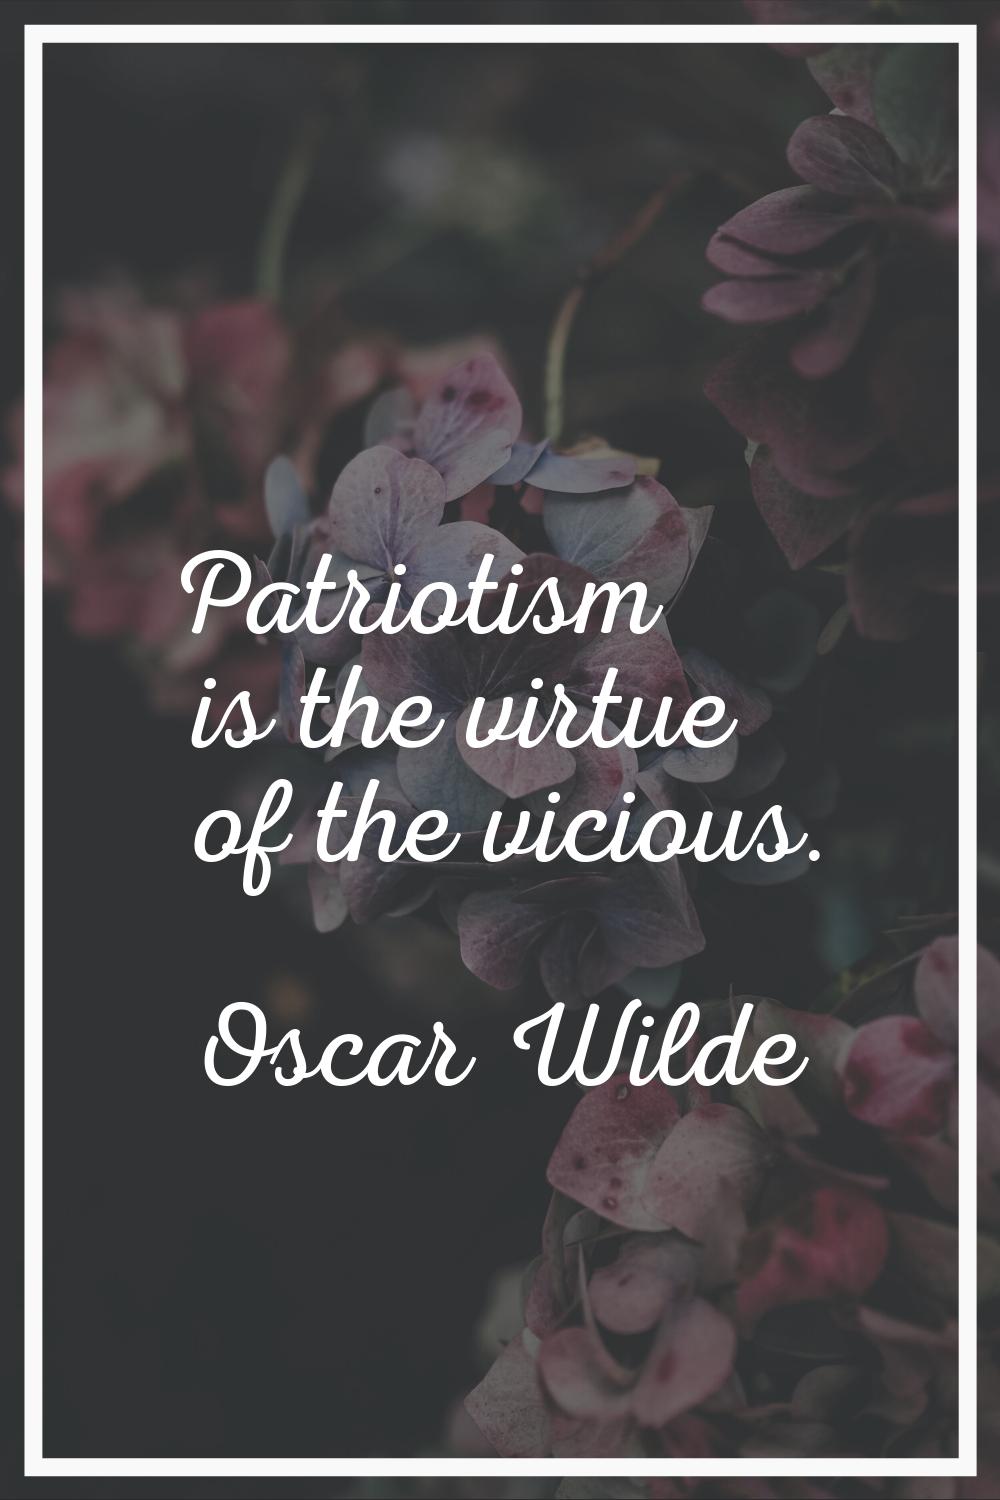 Patriotism is the virtue of the vicious.